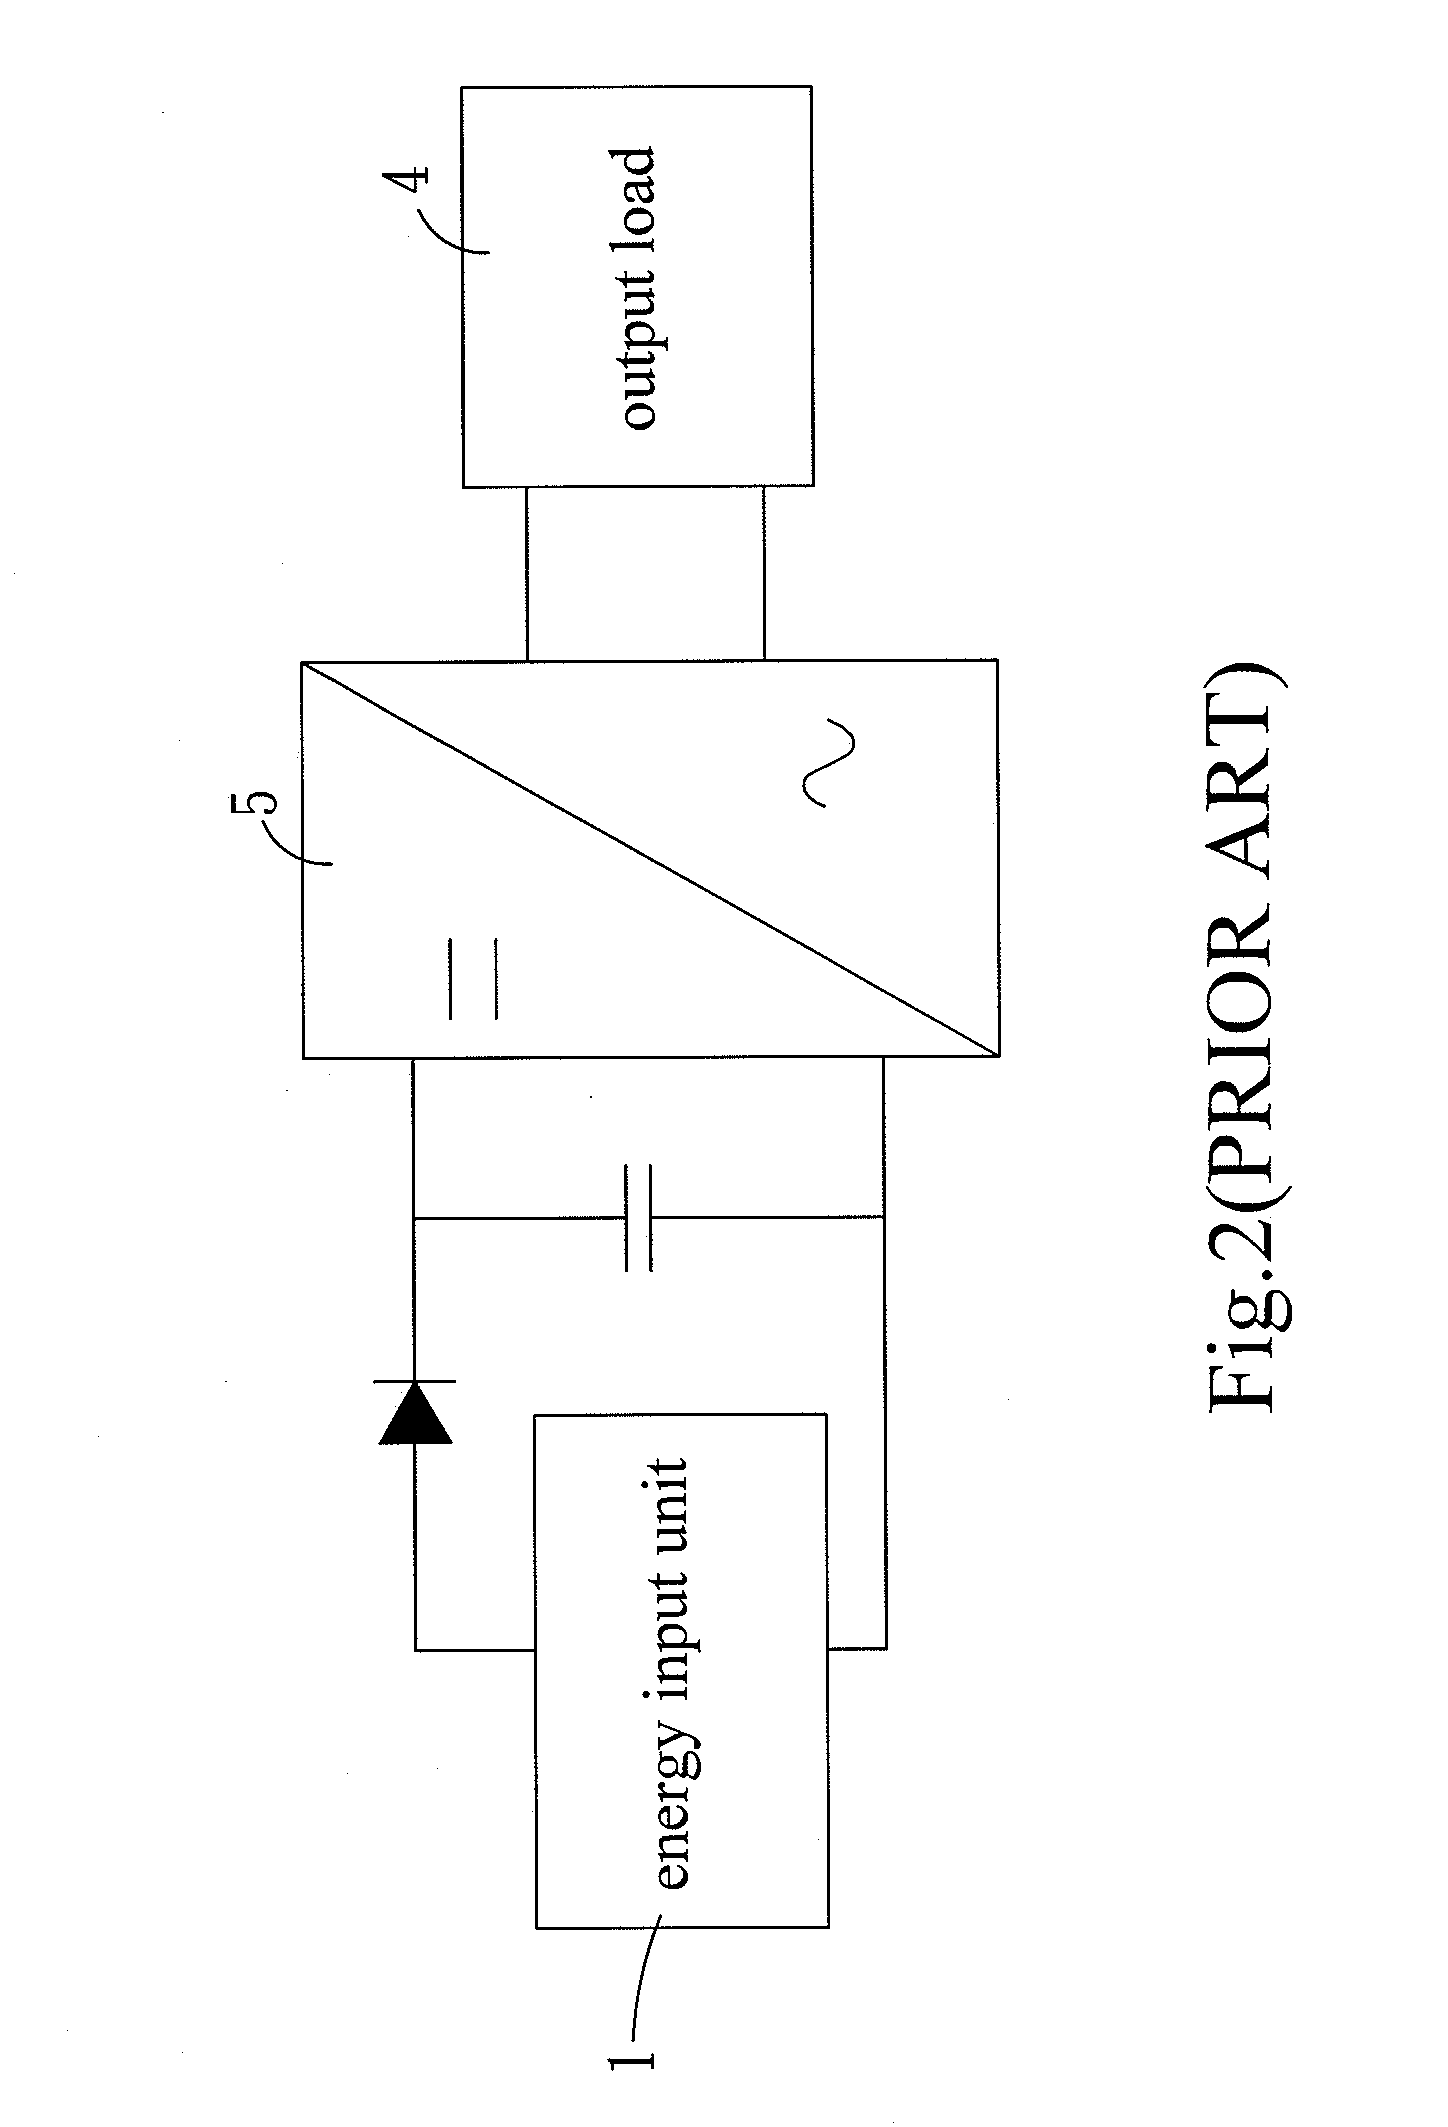 Integrated-type high step-up ratio dc-ac conversion circuit with auxiliary step-up circuit